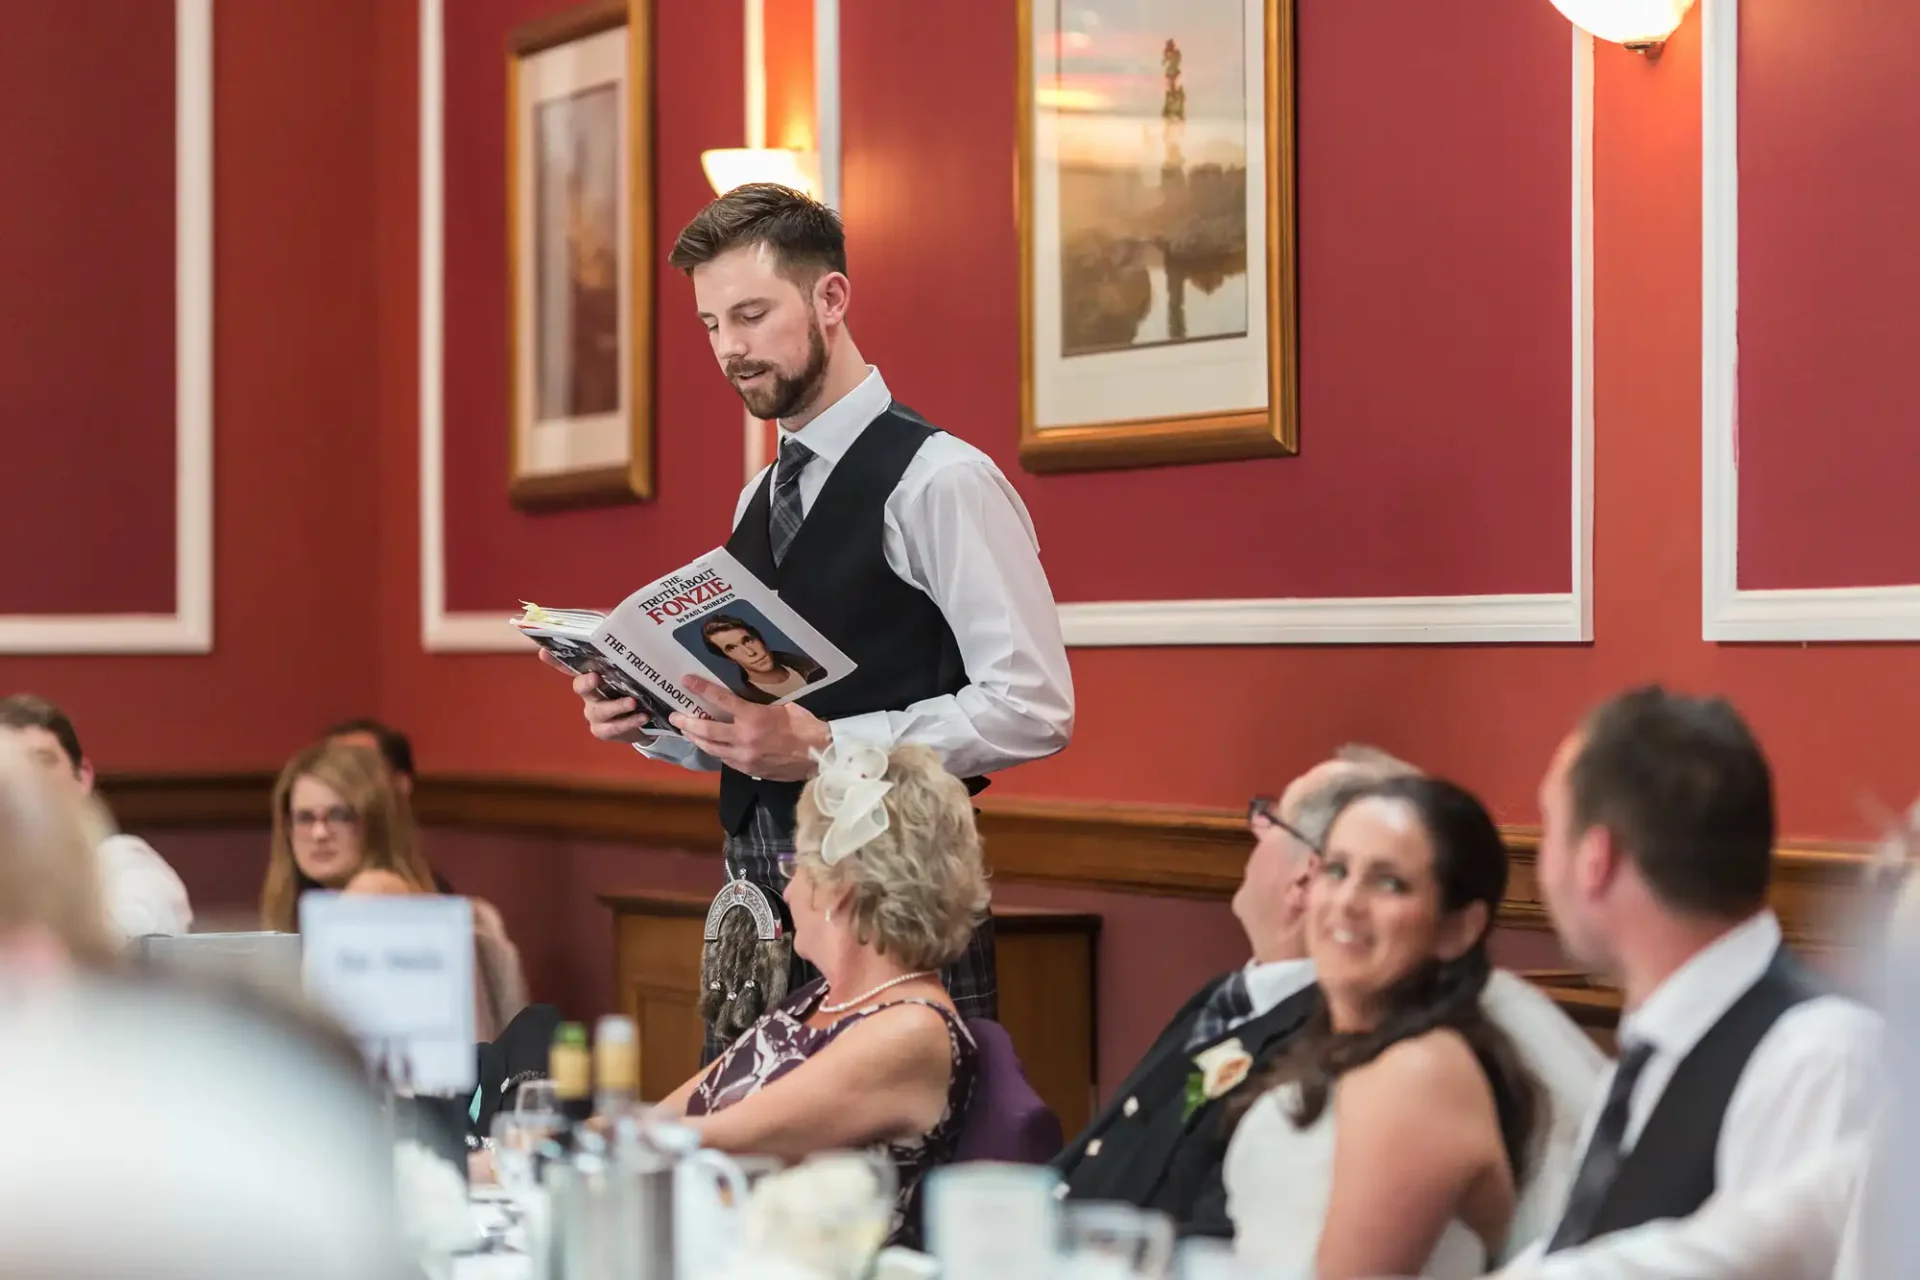 A waiter with a beard, reading a magazine while standing in a busy banquet hall filled with seated guests.